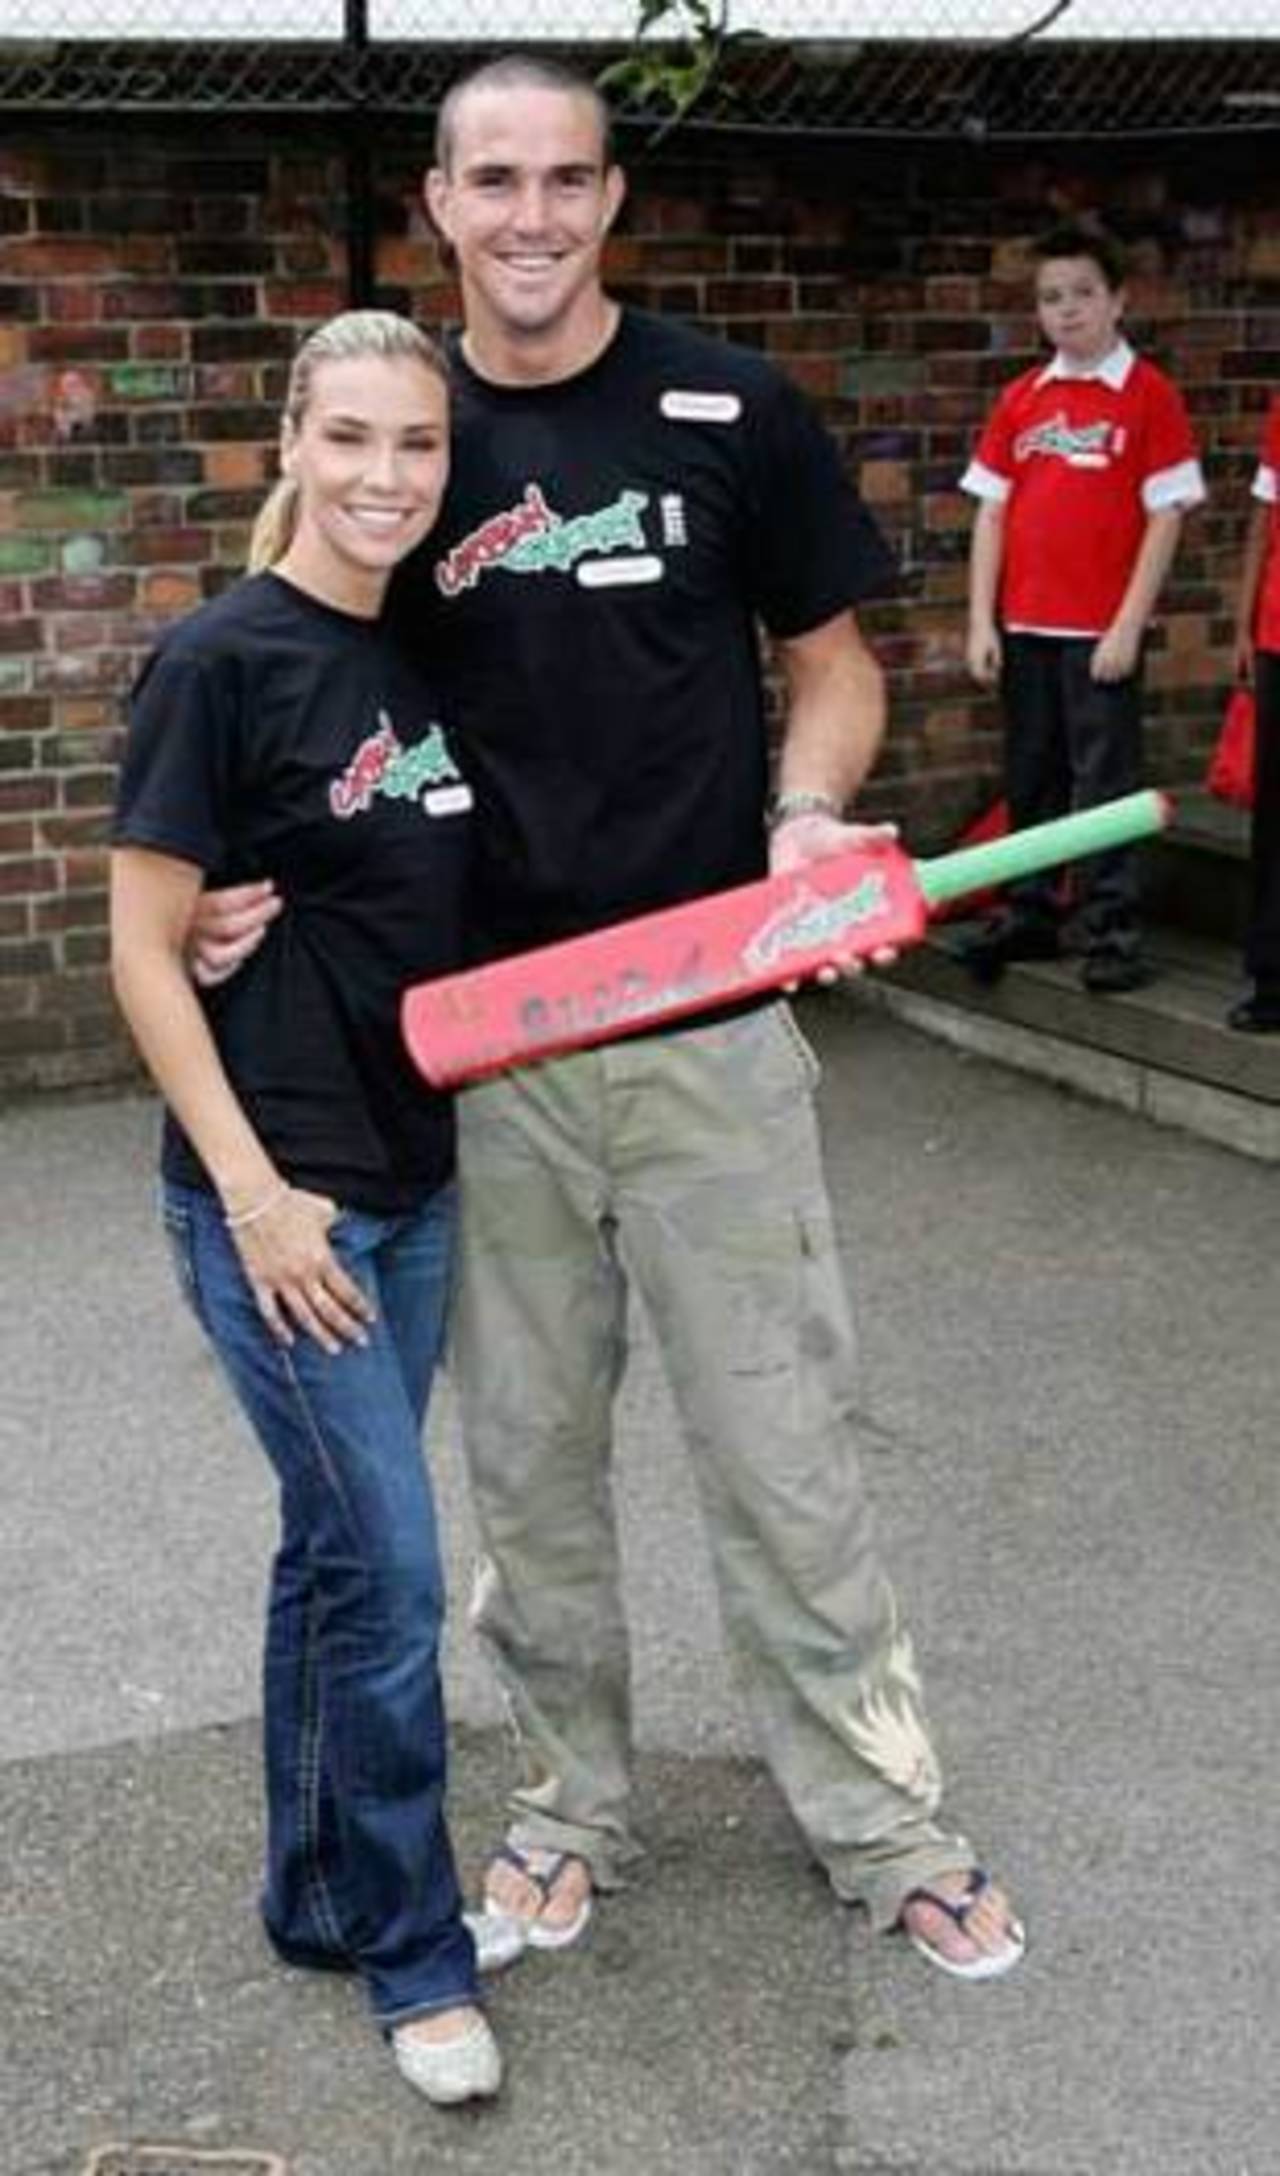 Jessica Taylor and Kevin Pietersen at the launch of Howzart, London, July 10, 2006